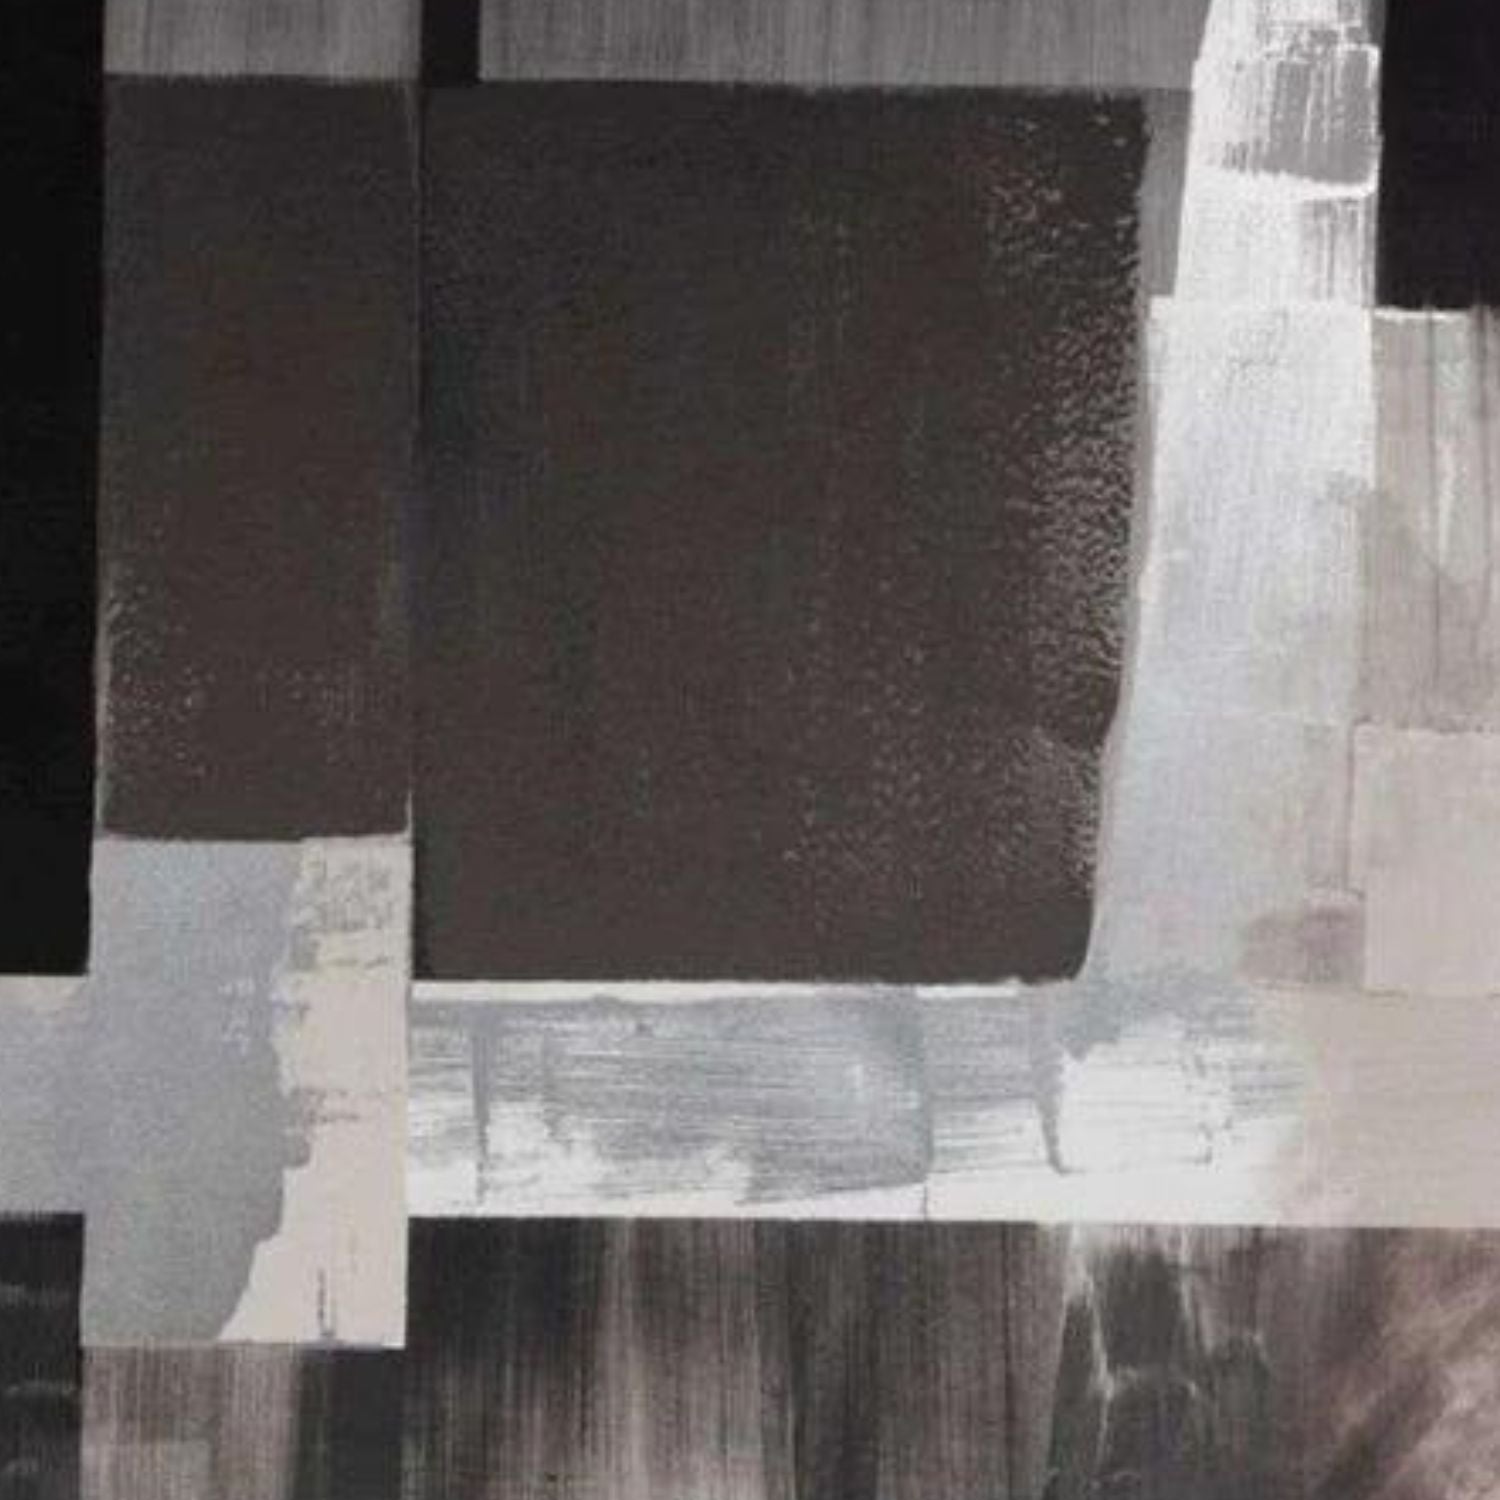 Foil abstract rectangular canvas in black, brown and white